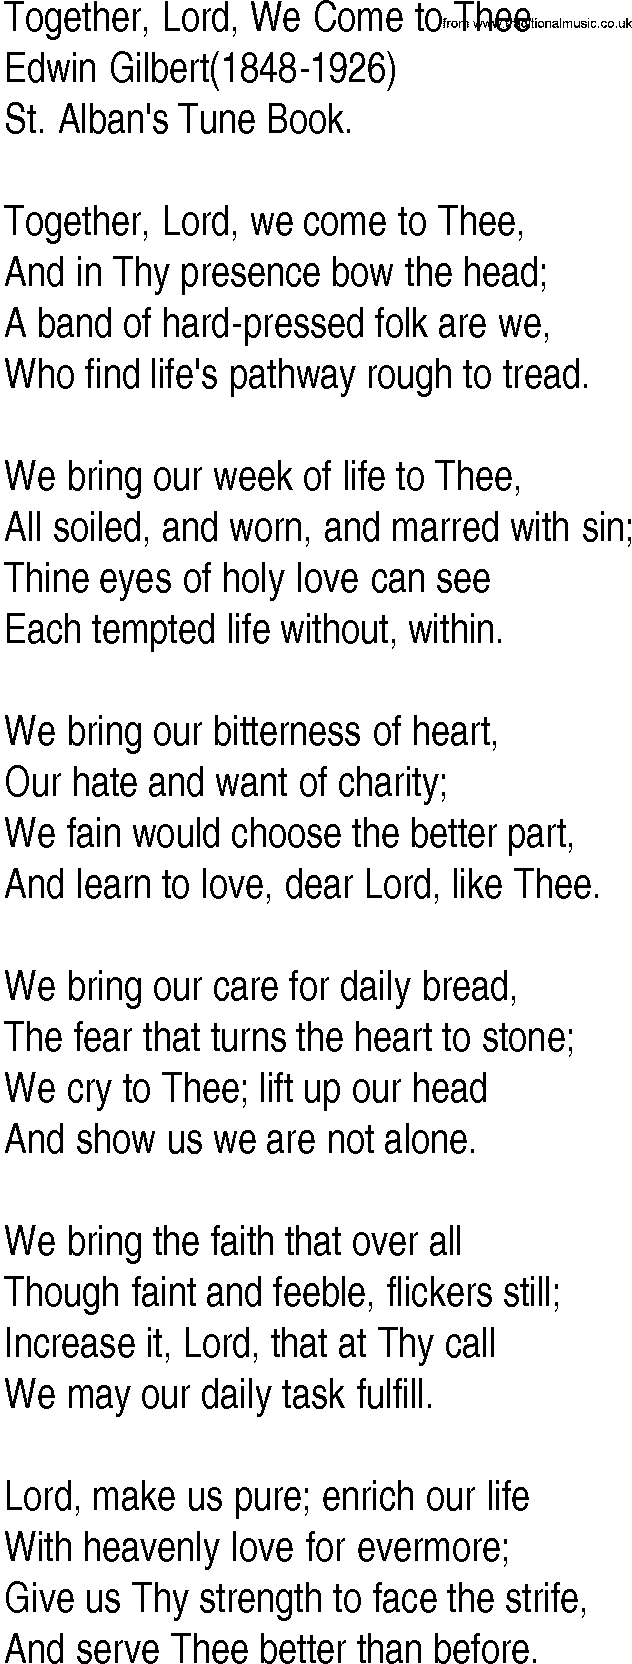 Hymn and Gospel Song: Together, Lord, We Come to Thee by Edwin Gilbert lyrics